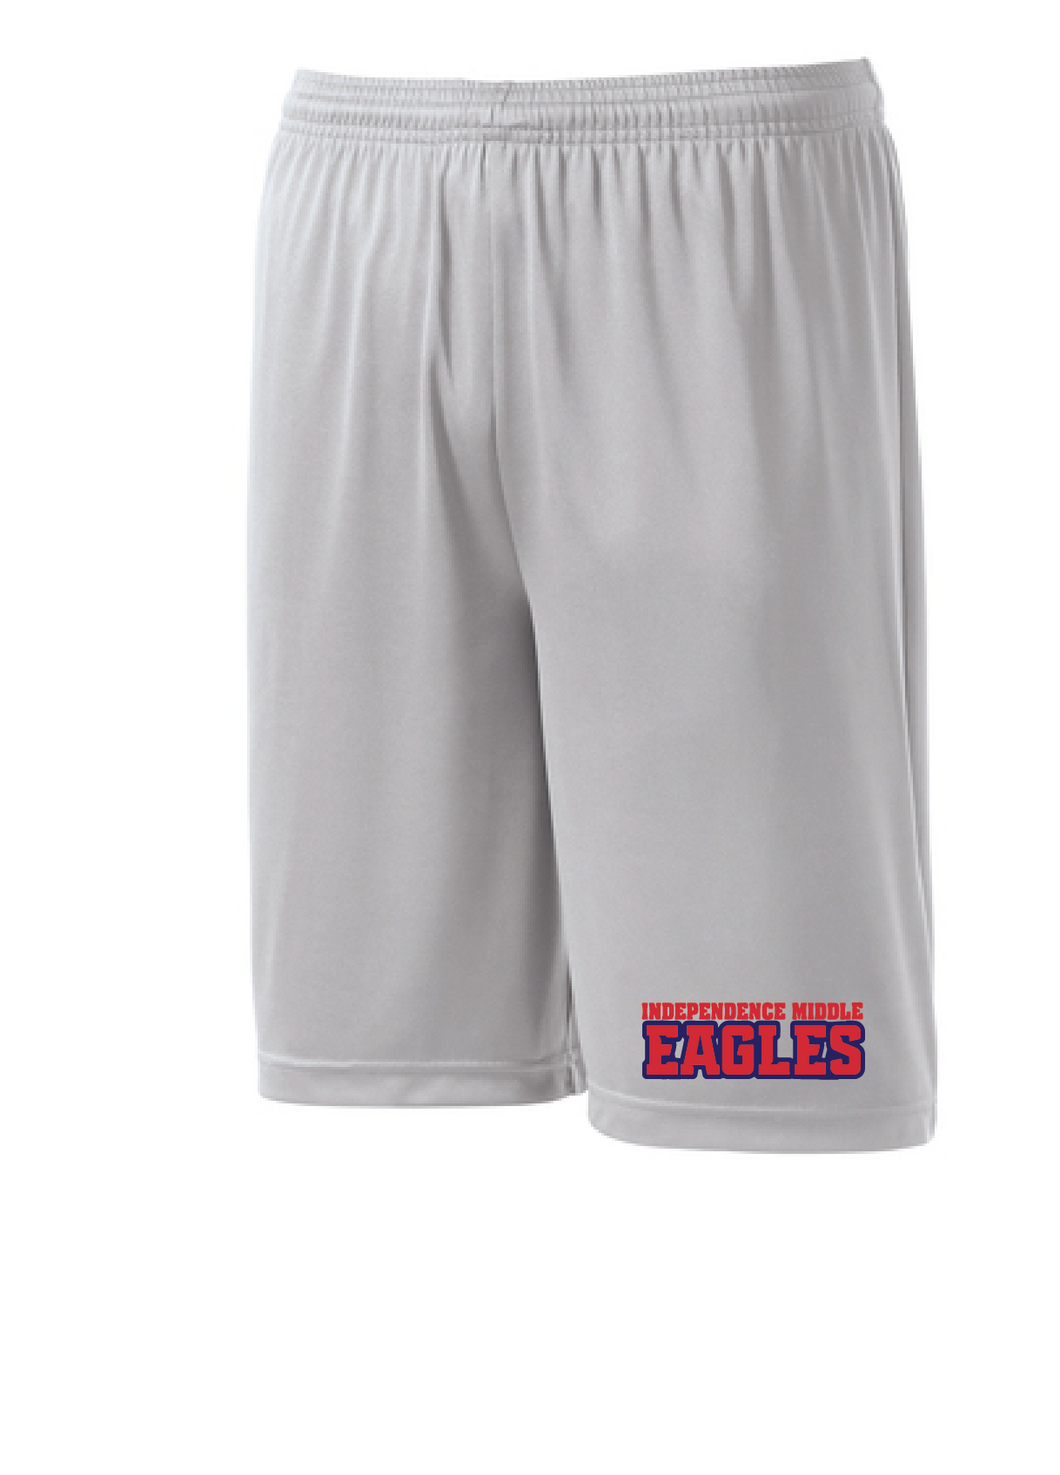 Competitor Short / Silver / Independence Middle Football